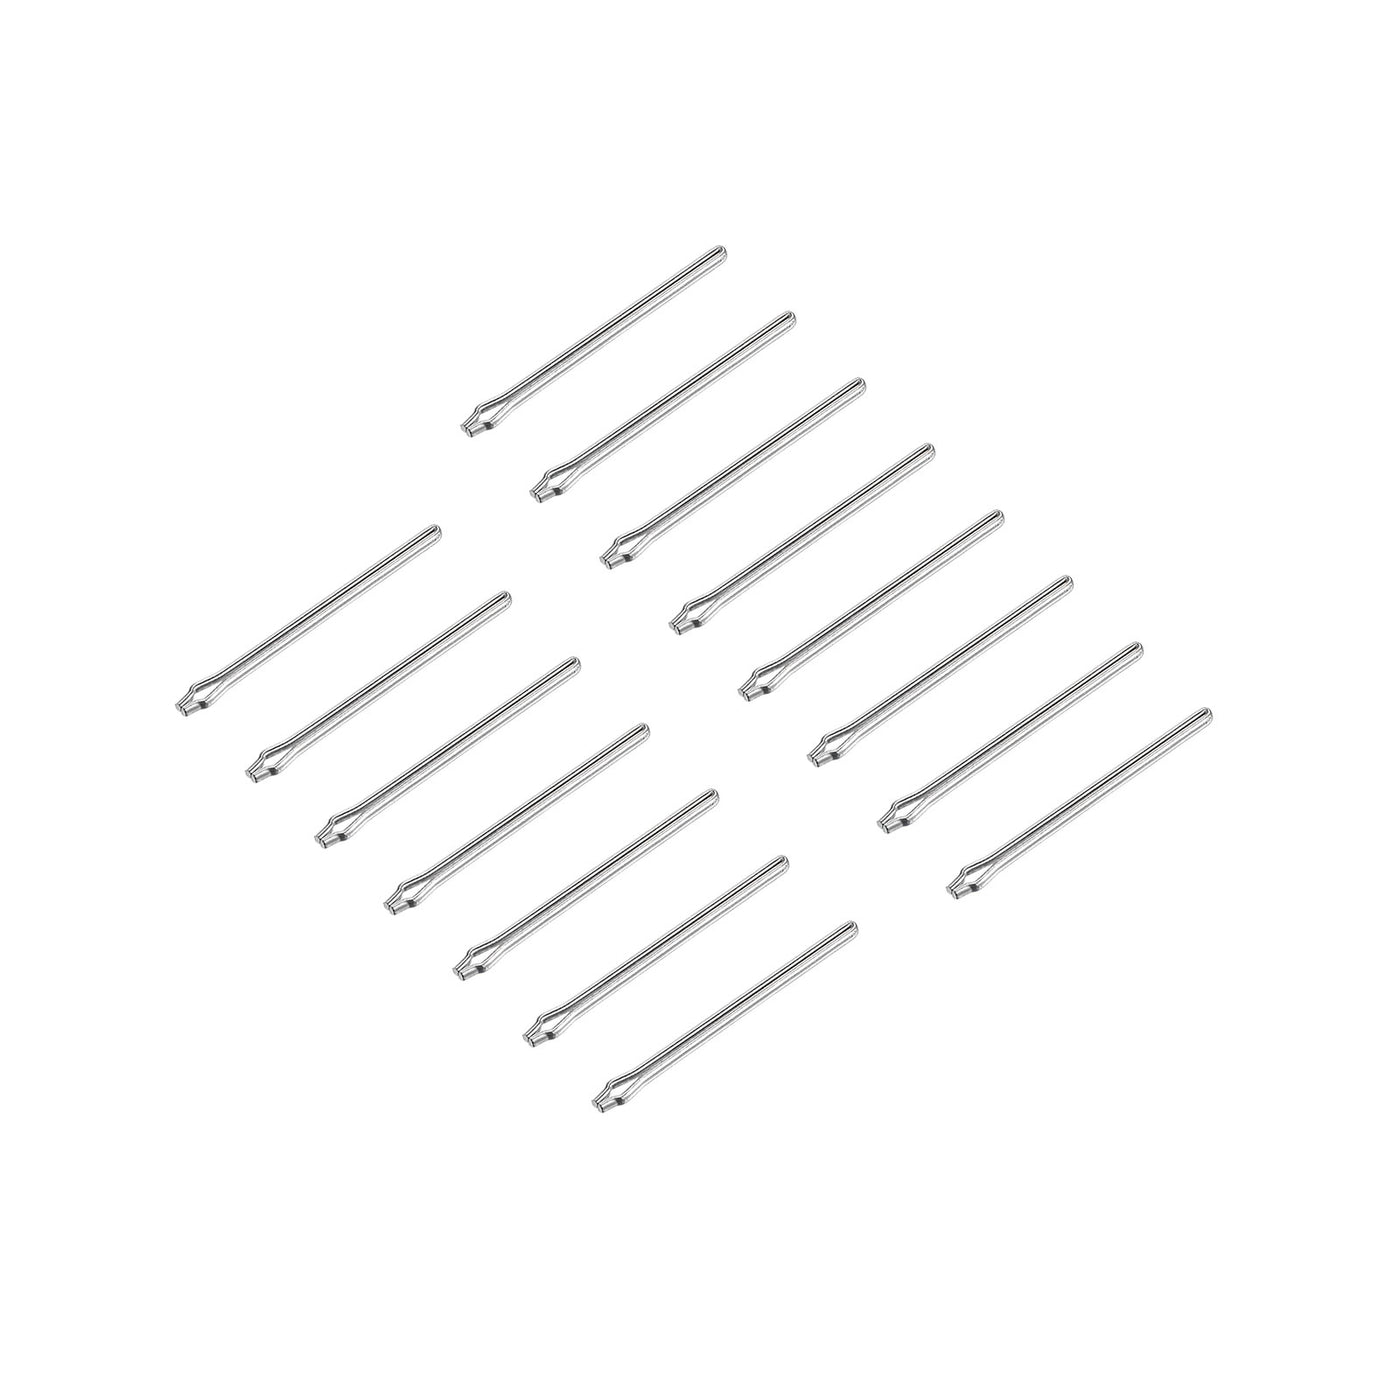 Uxcell Uxcell 15Pcs 27mm Watch Band Link Cotter Pin, Stainless Steel 1mm Dia. Silver Tone